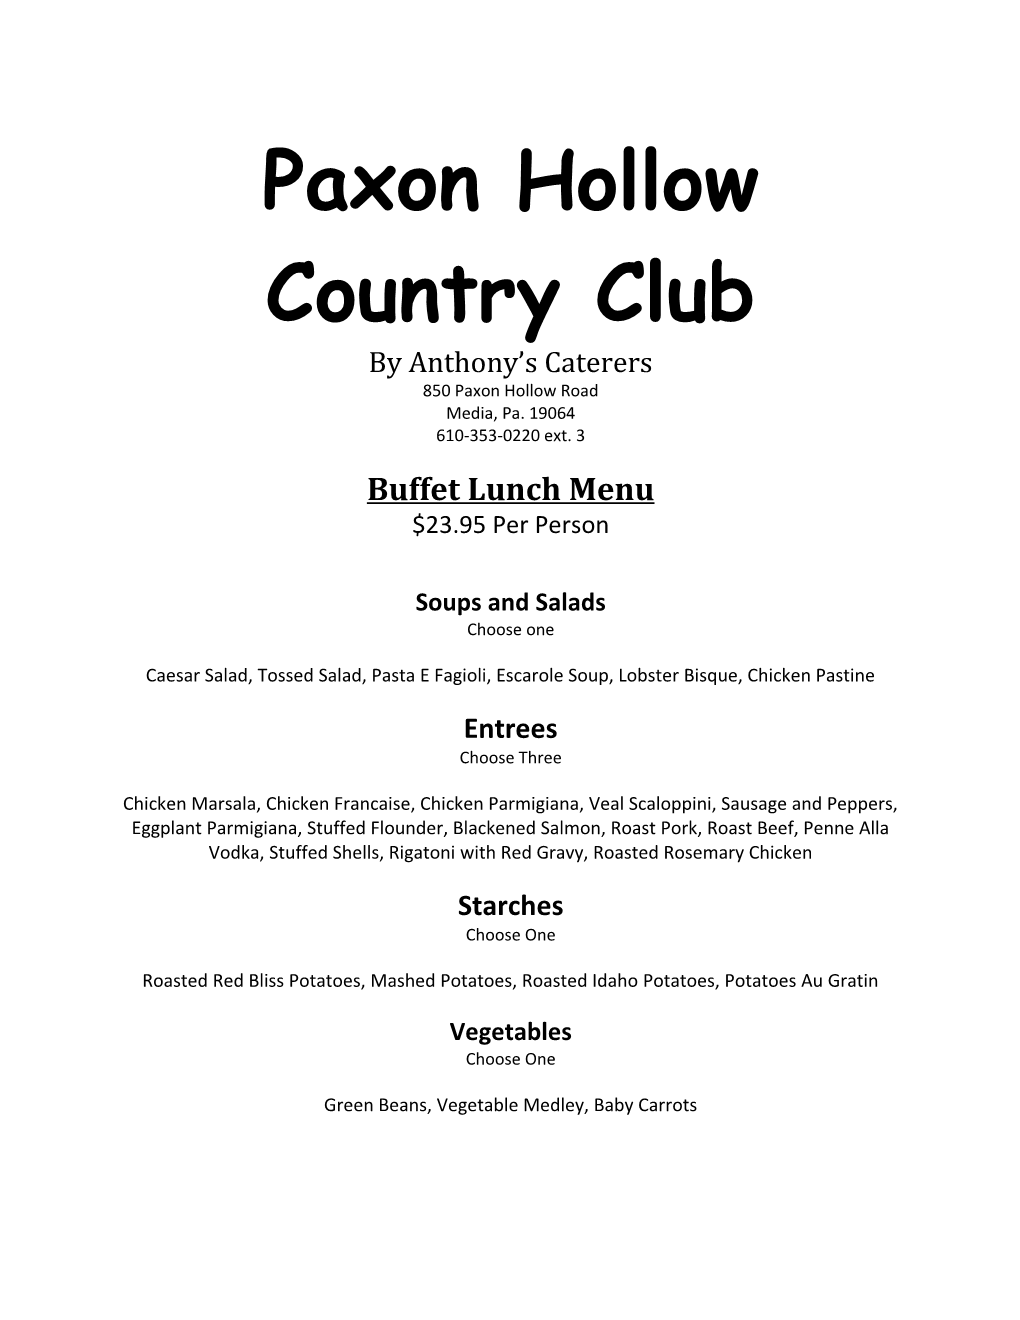 Paxon Hollow Country Club